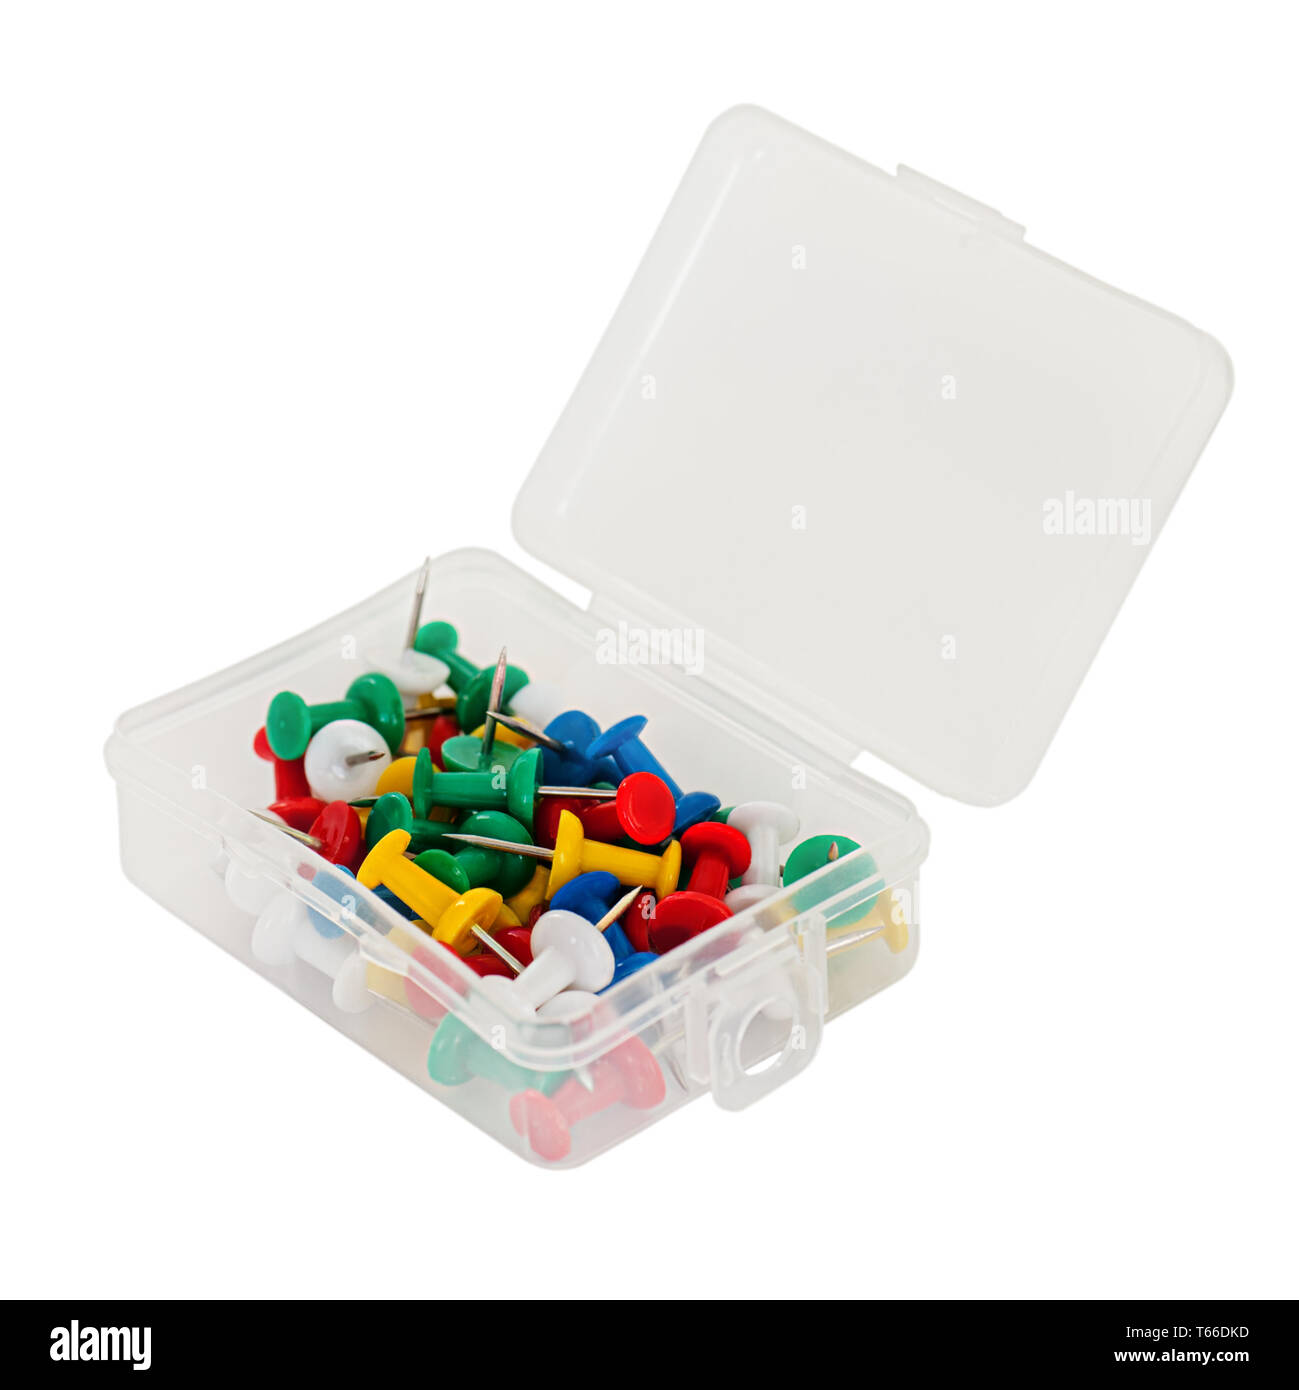 Picture Of A Transparent Plastic Box With White Background Stock